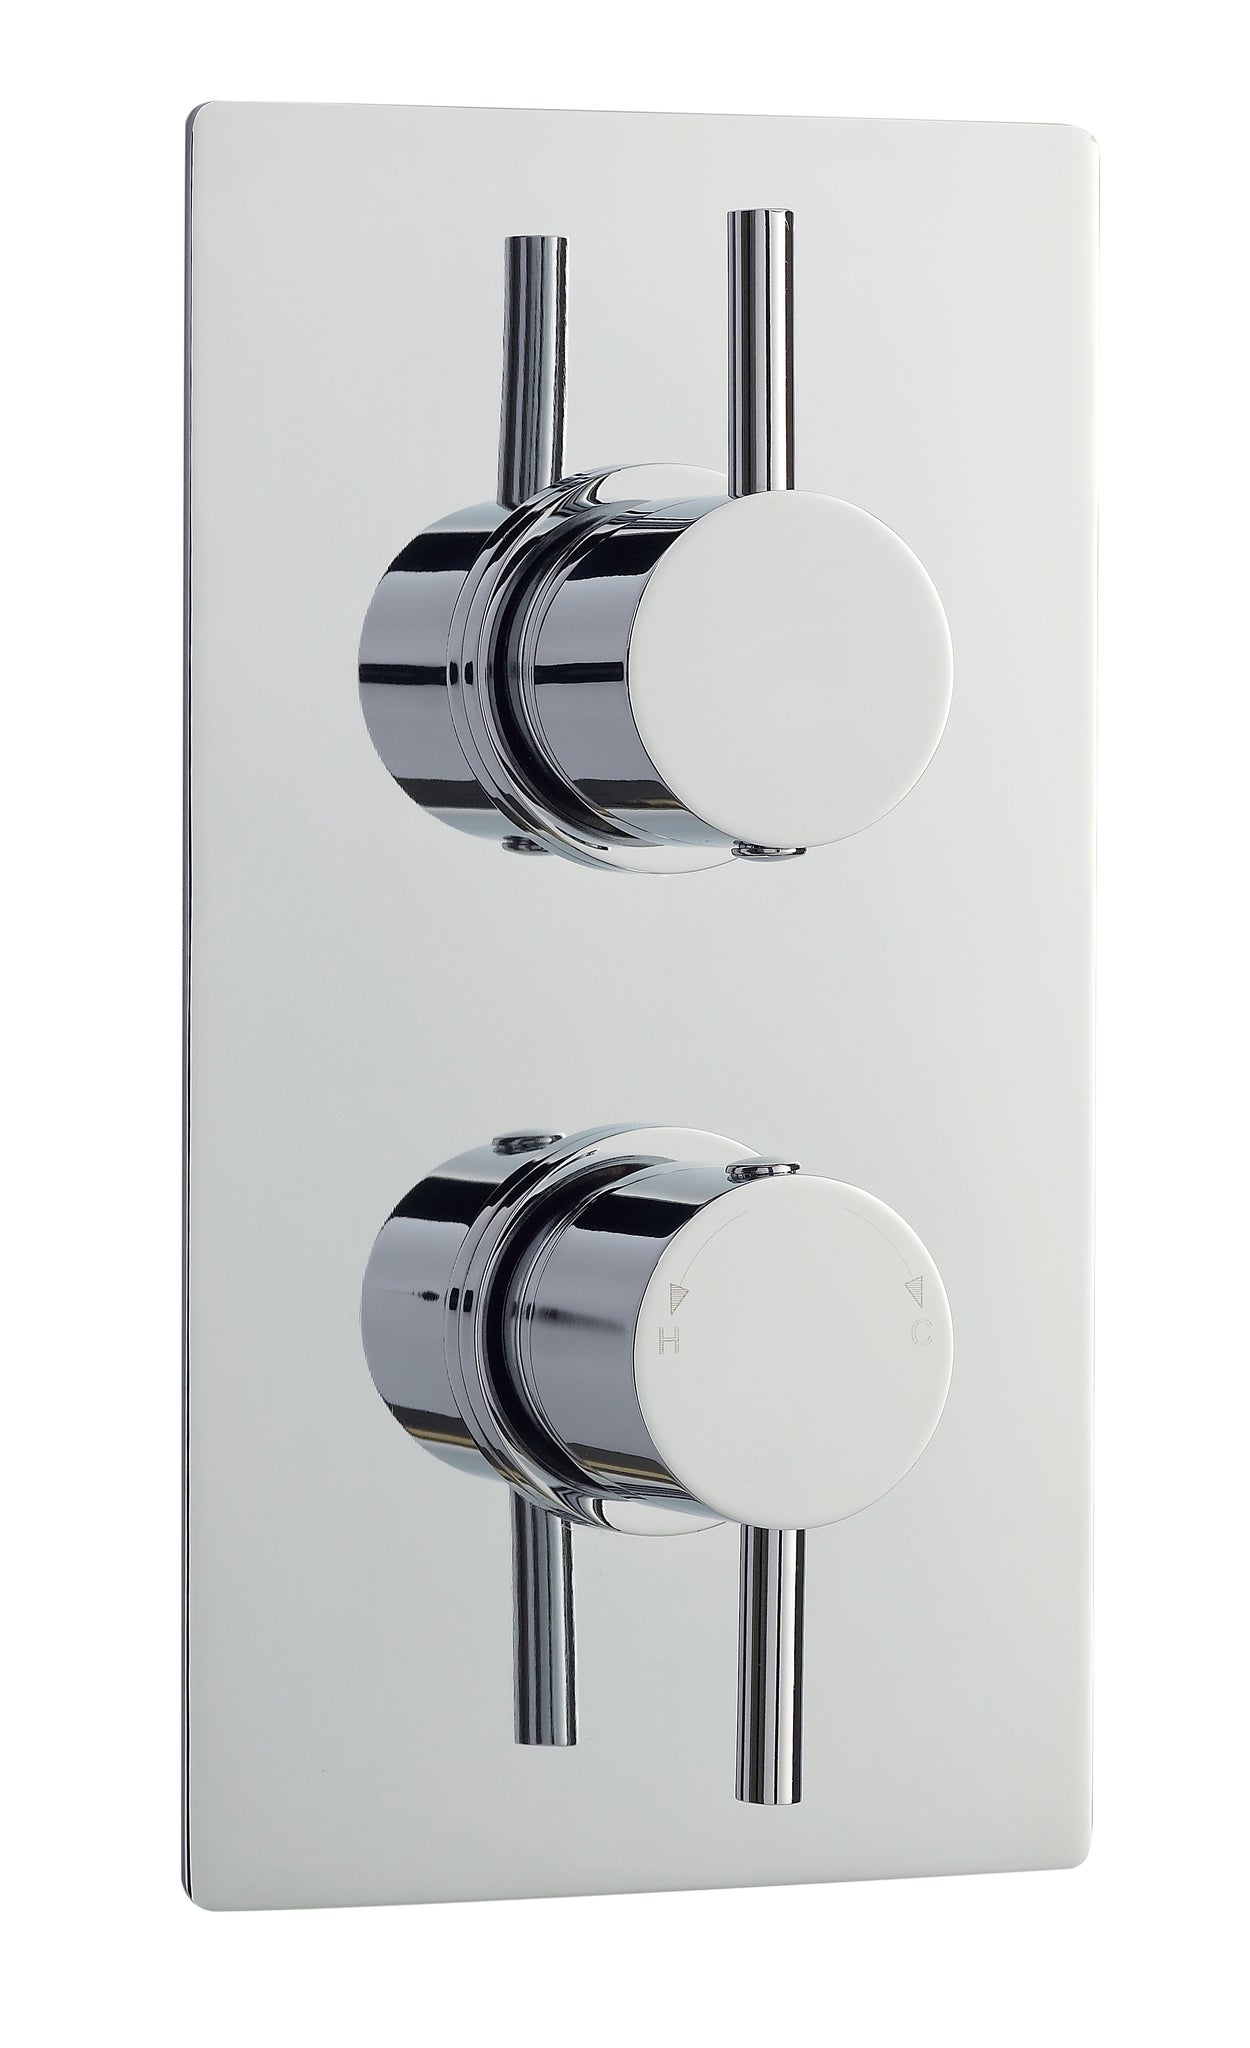 Nuie Quest Twin Thermostatic Shower Valve With Diverter